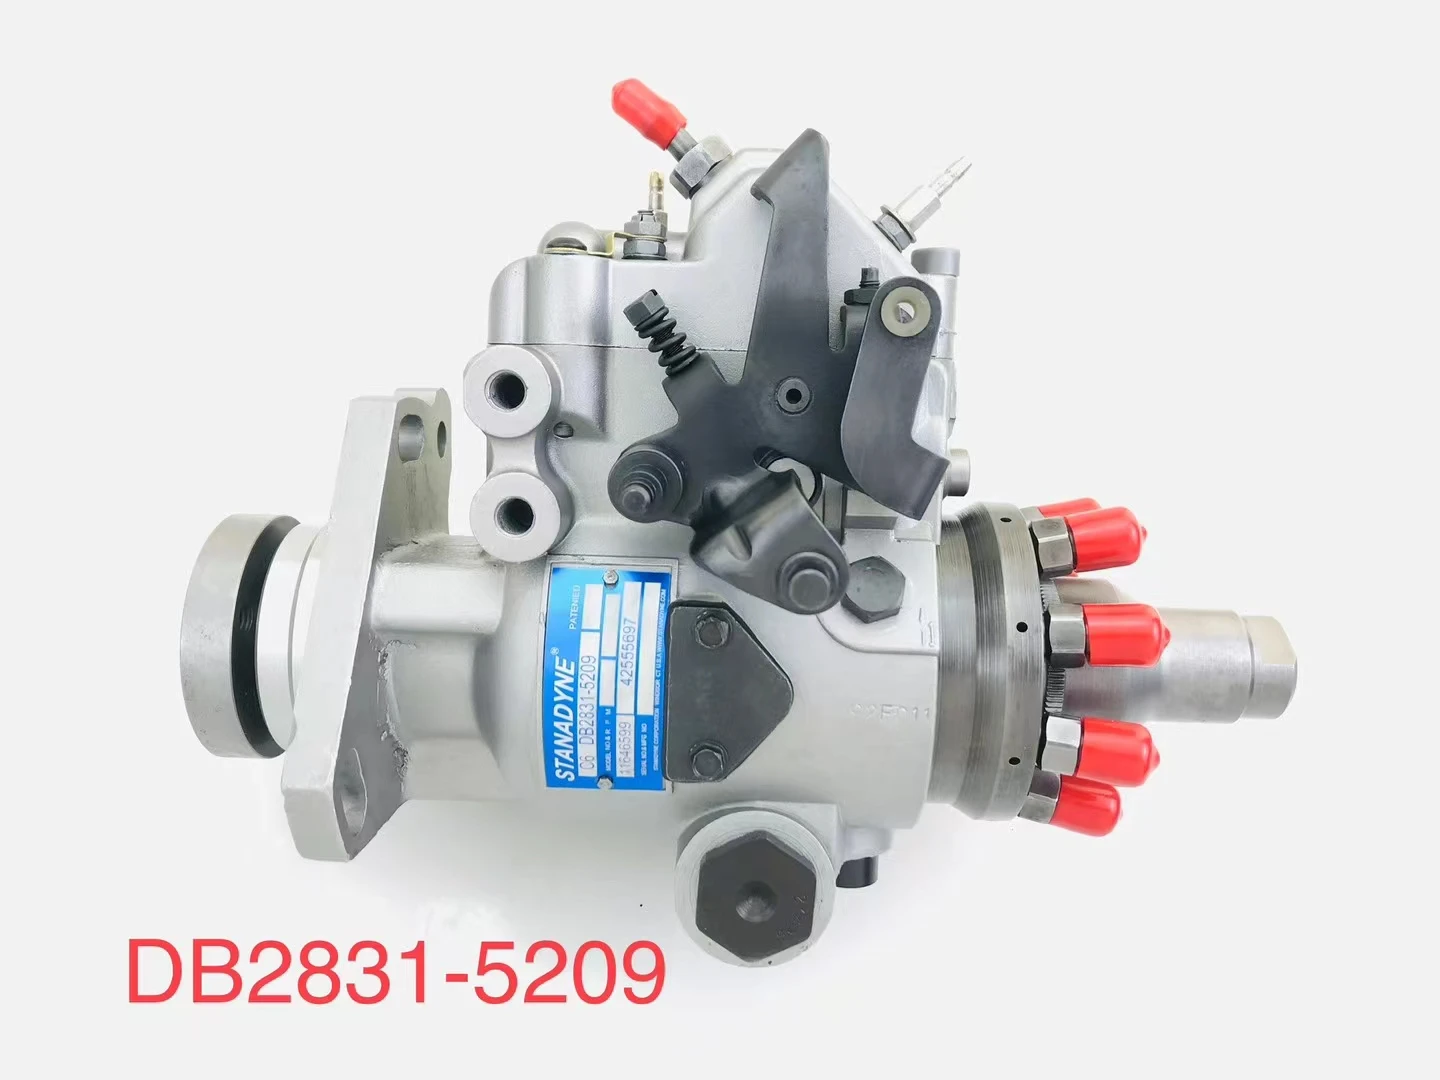 Stanadyne 6.5 Electronic Injection Pump